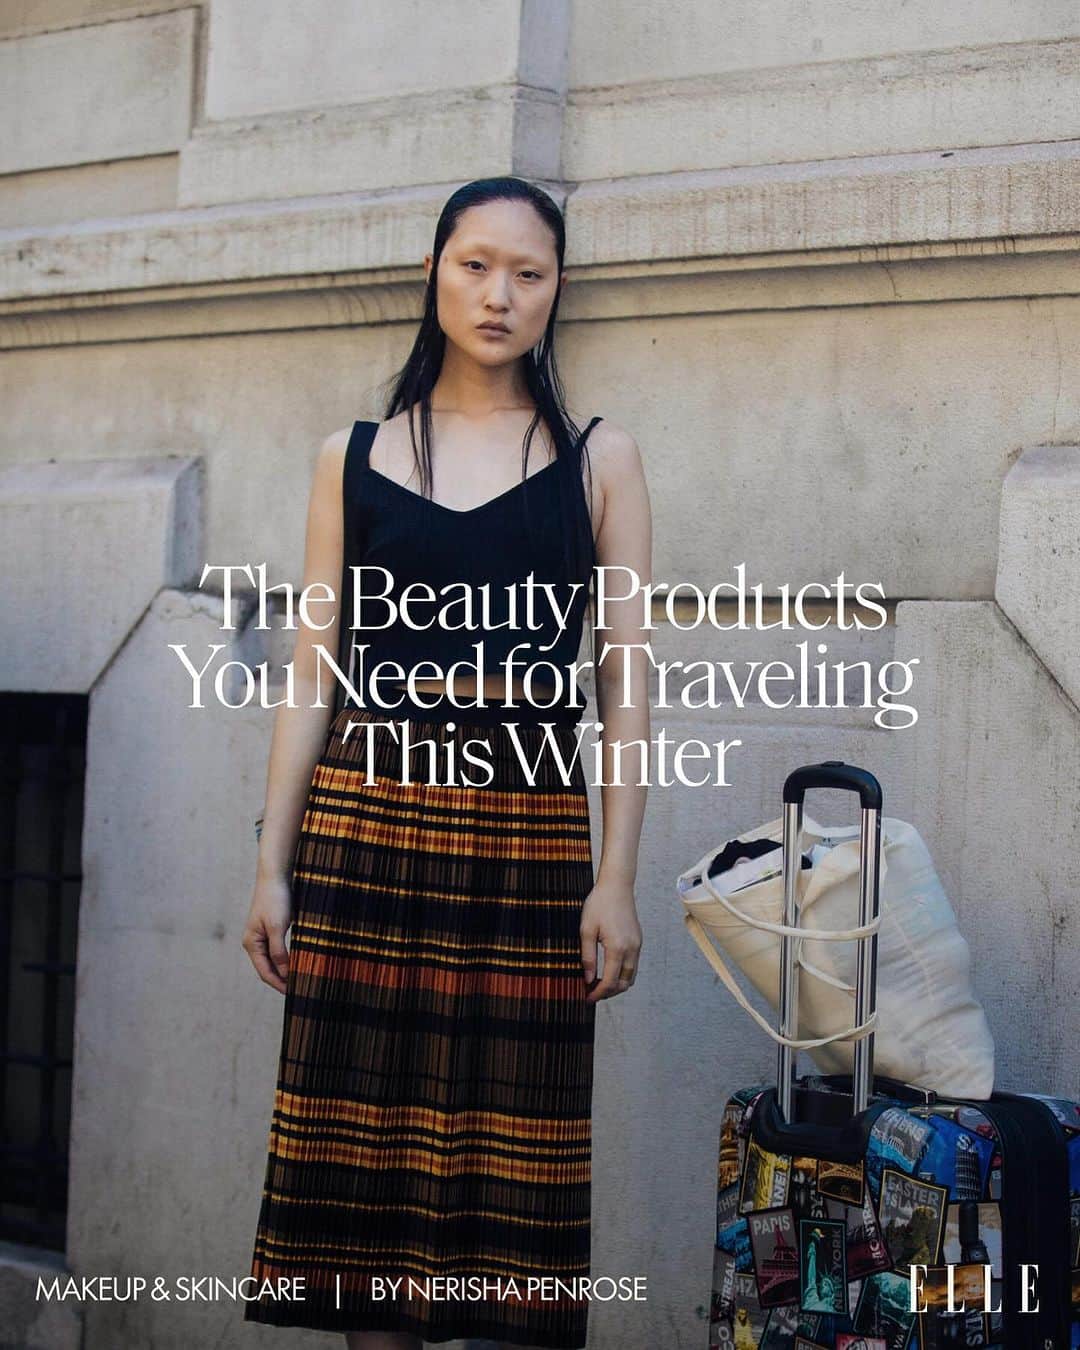 ELLE Magazineのインスタグラム：「Calling all beauty lovers! Welcome to First Class Beauty, an extensive guide to the best travel beauty products to carry on (or check) for your next adventure.   Curated and tested by ELLE.com’s beauty team and self-professed travel connoisseurs, @theislandiva and @girlnamednee, this guide highlights the best troubleshooters for your winter beauty woes, guaranteed to withstand any arid conditions you may encounter.   Tap the link in bio ahead of your next OOO adventure.」